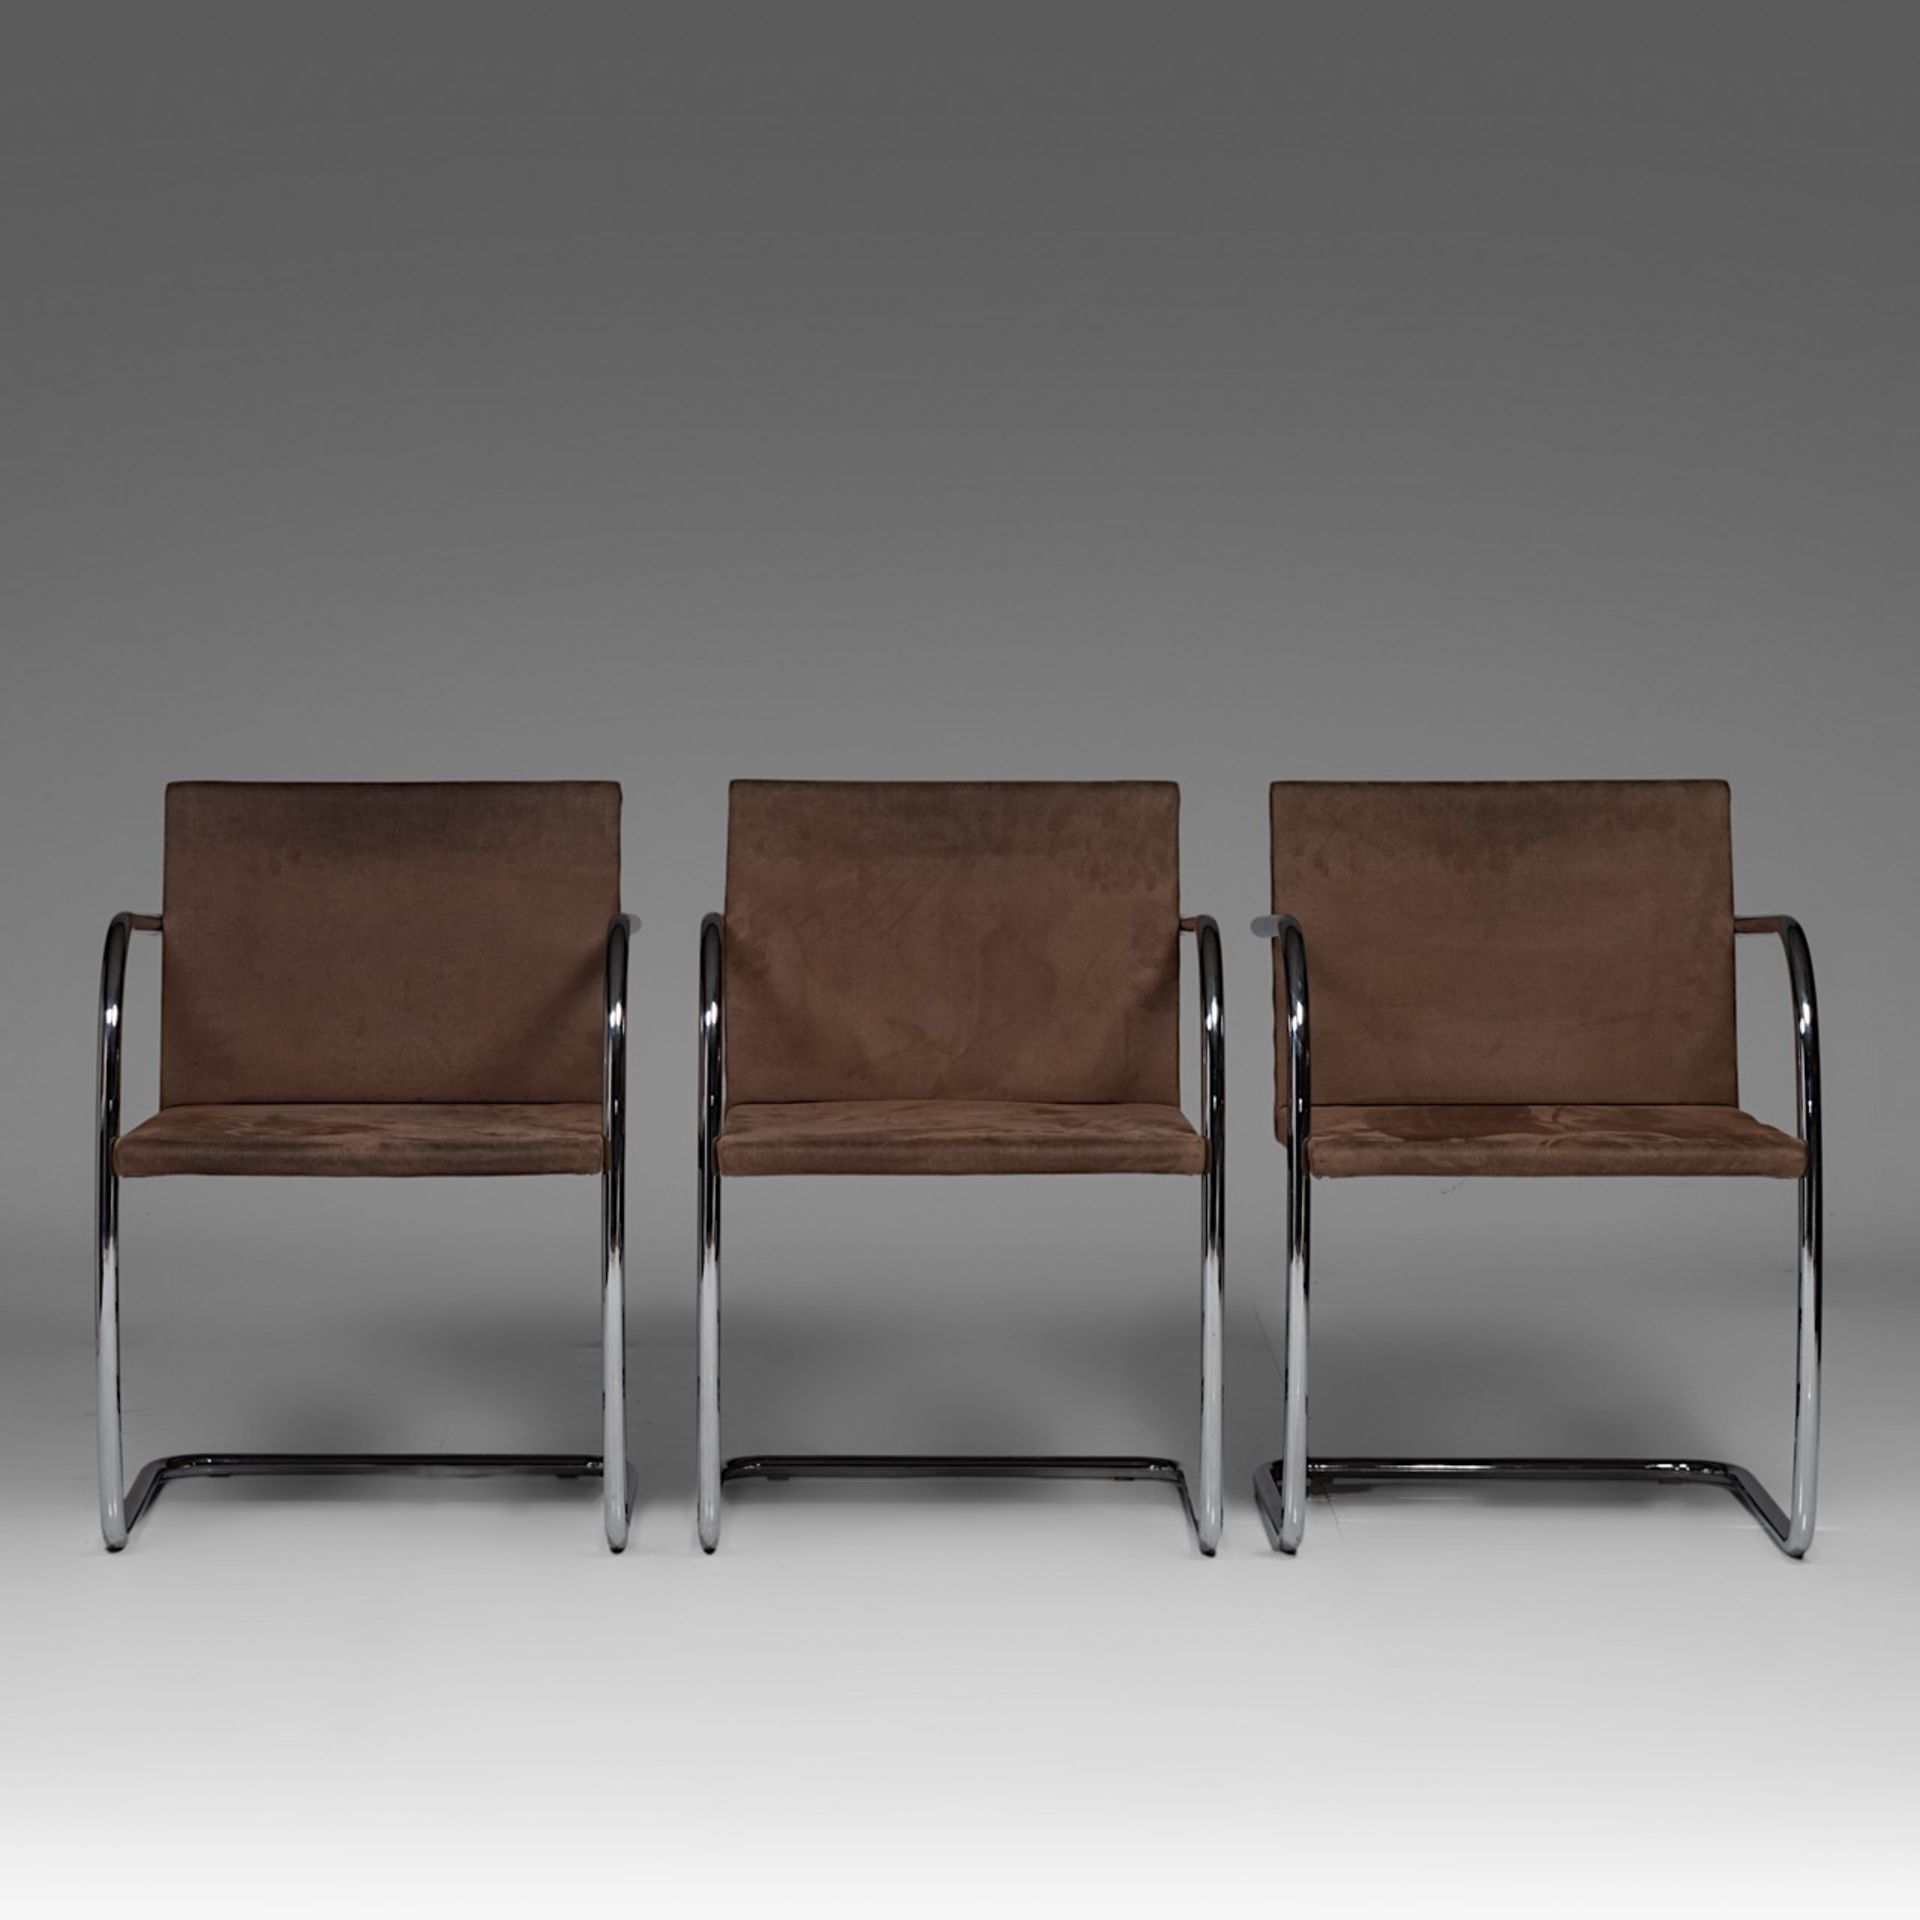 A set of 6 tubular Brno chairs by Ludwig Mies van der Rohe for Knoll, marked, H 78 - W 55 cm - Image 9 of 17